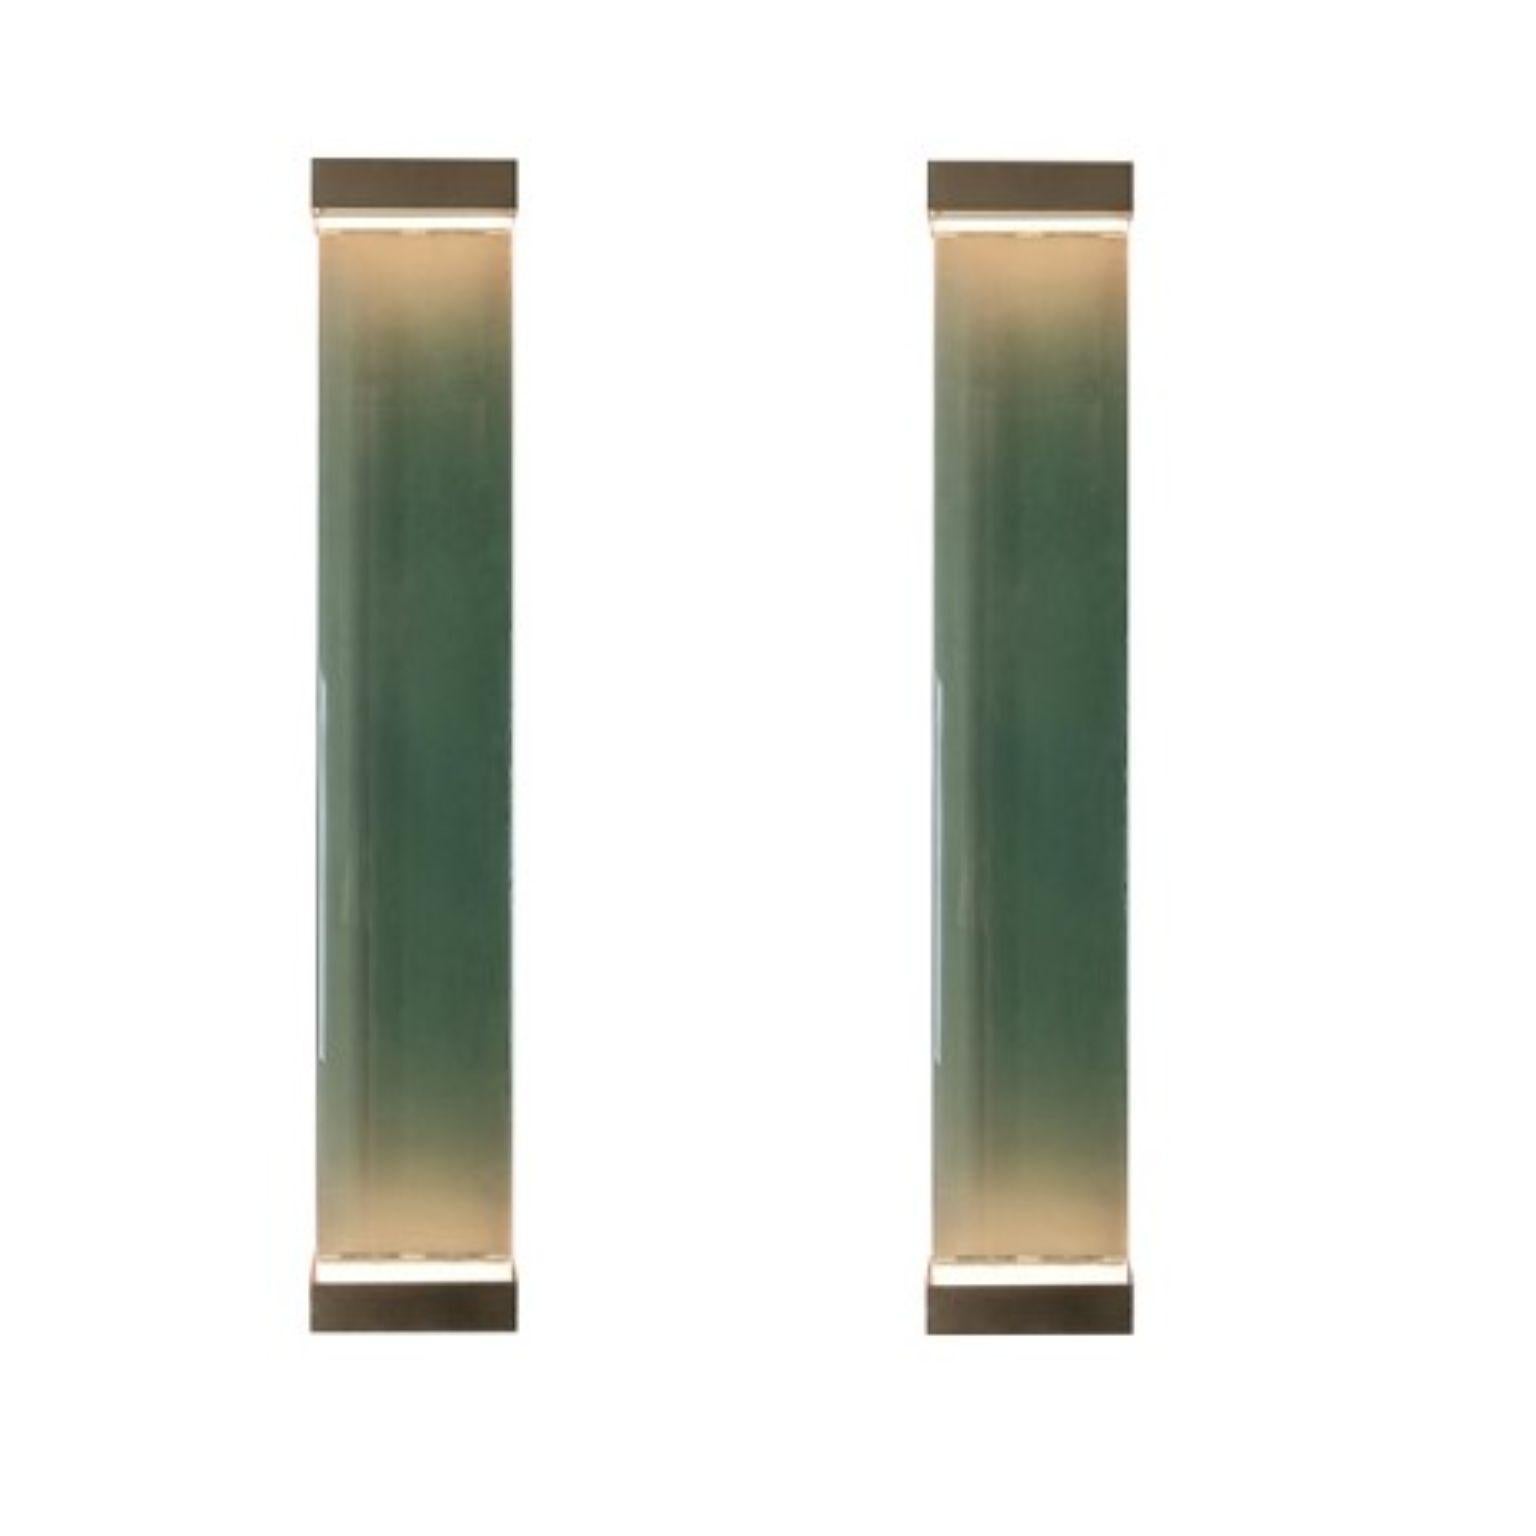 Jud wall lamp by Draga & Aurel
Dimensions: W 23, D 10, H 131.
Materials: Resin and brass

All our lamps can be wired according to each country. If sold to the USA it will be wired for the USA for instance.

Inspired by minimalism, the Jud